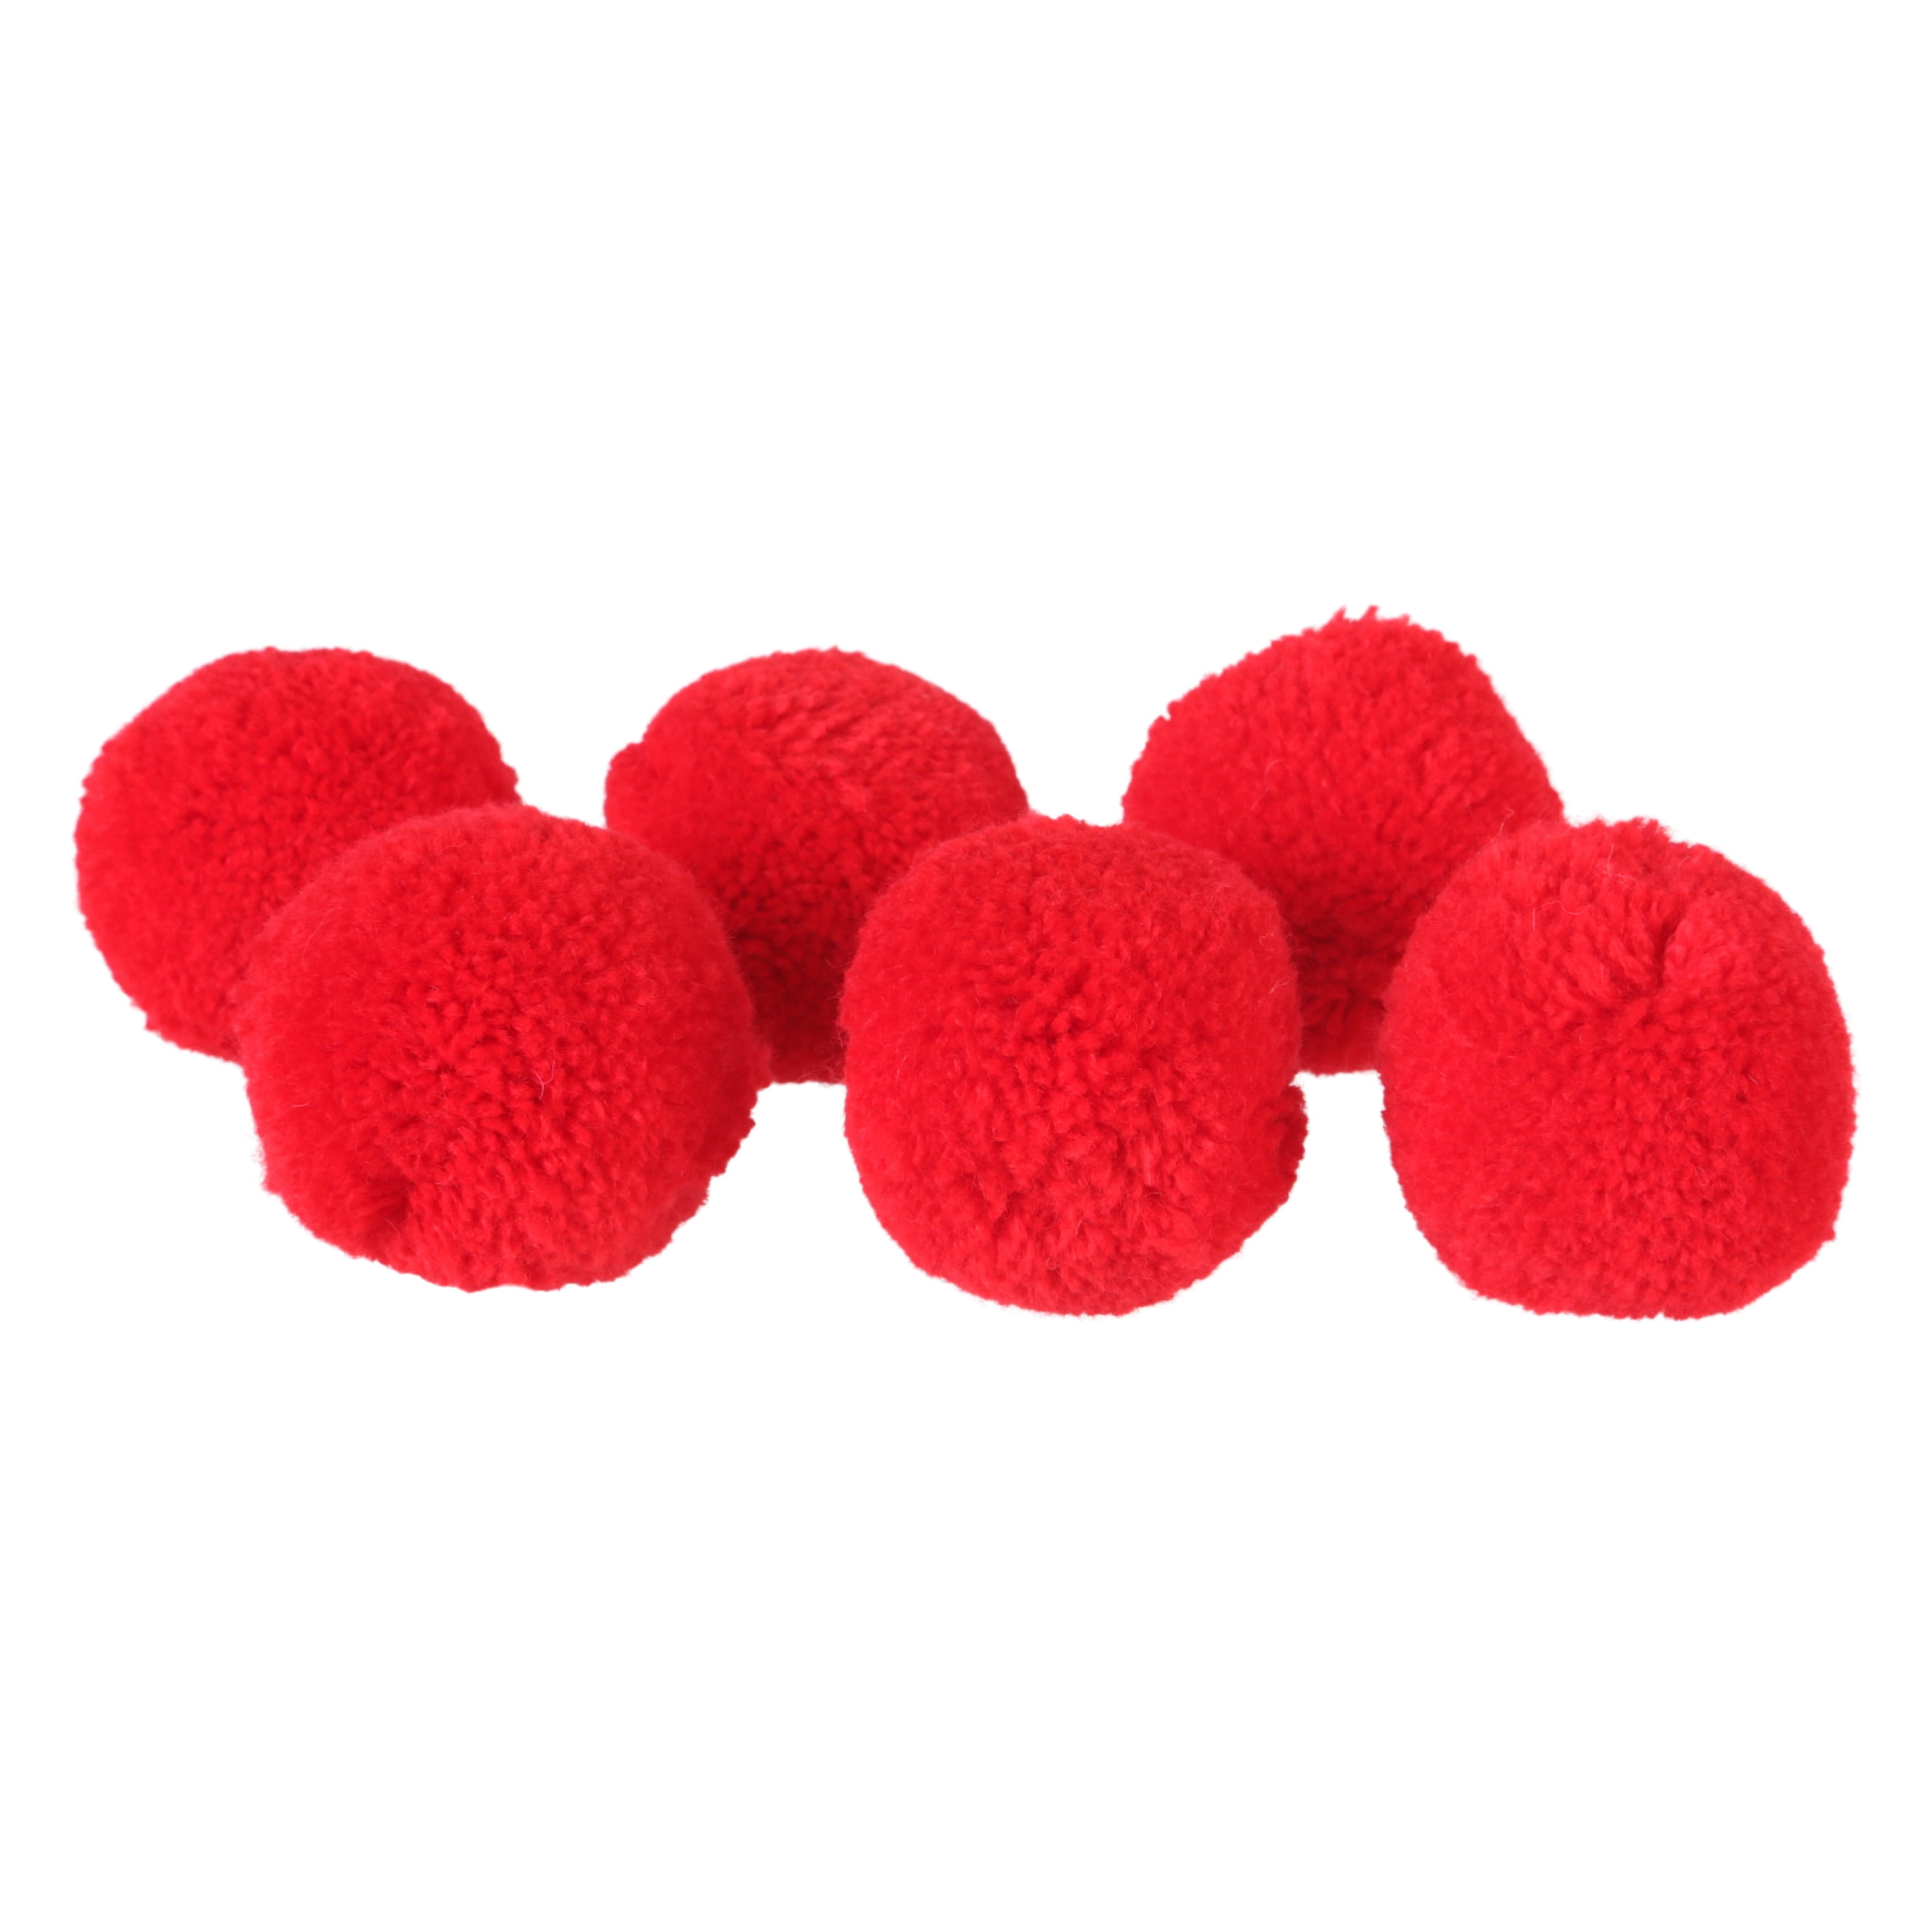  1.5 inch Red Craft Pom Poms 50 Pieces : Arts, Crafts & Sewing